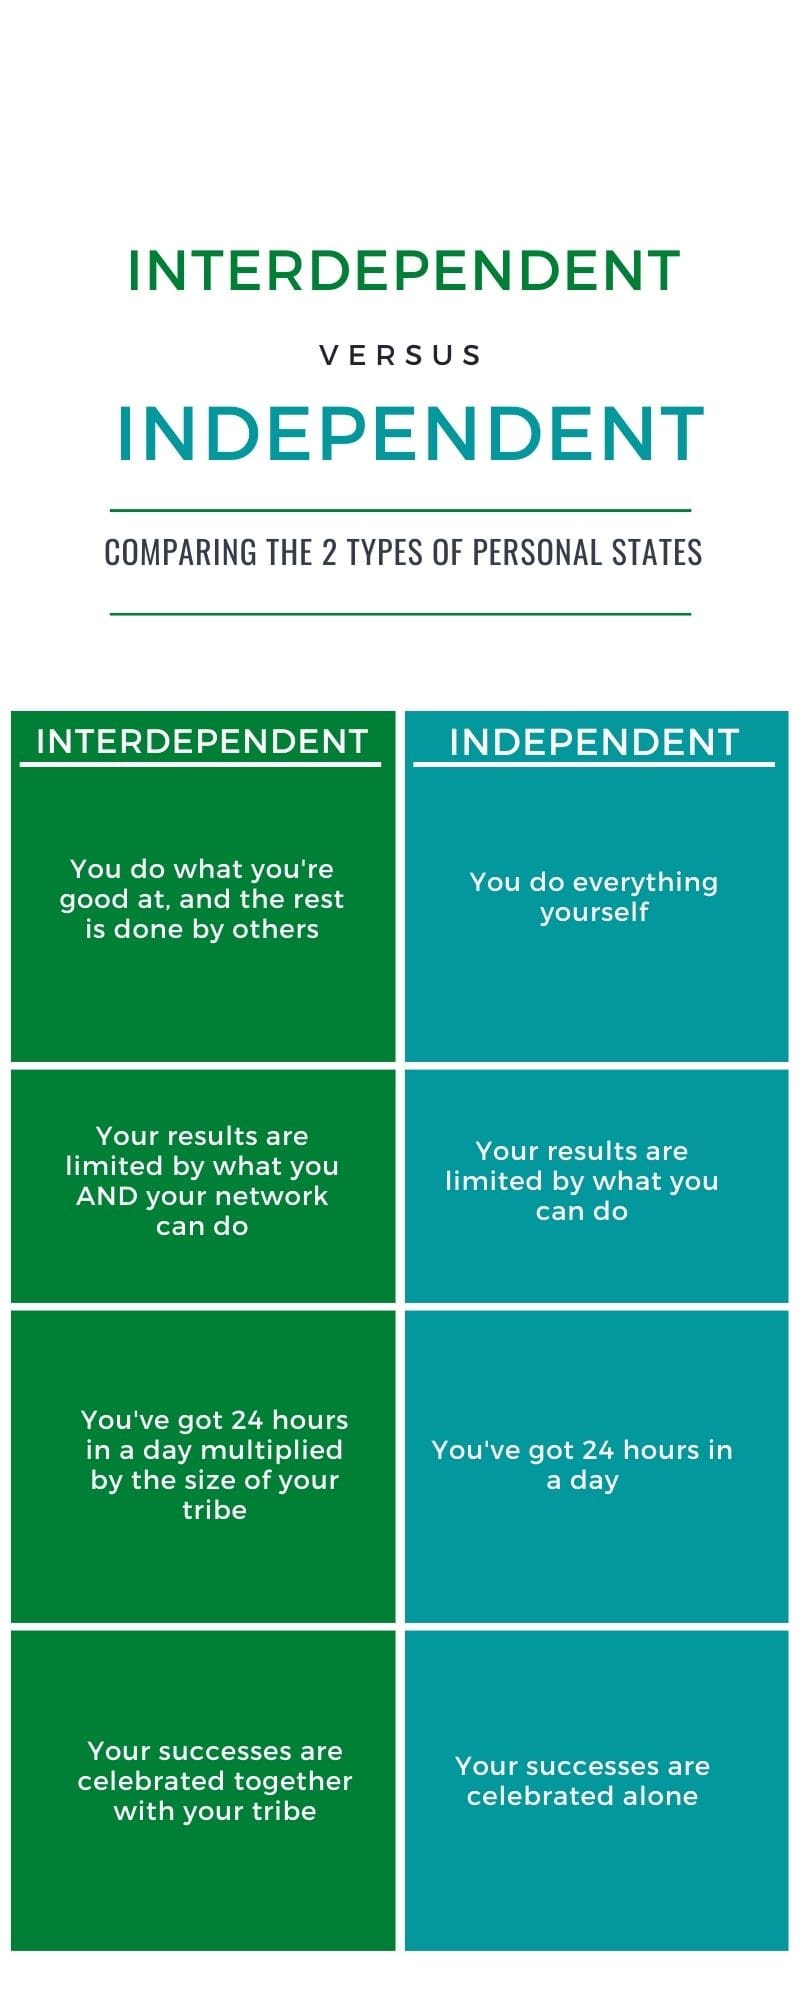 Networking Connections Infographic: Interdependent vs Independent 